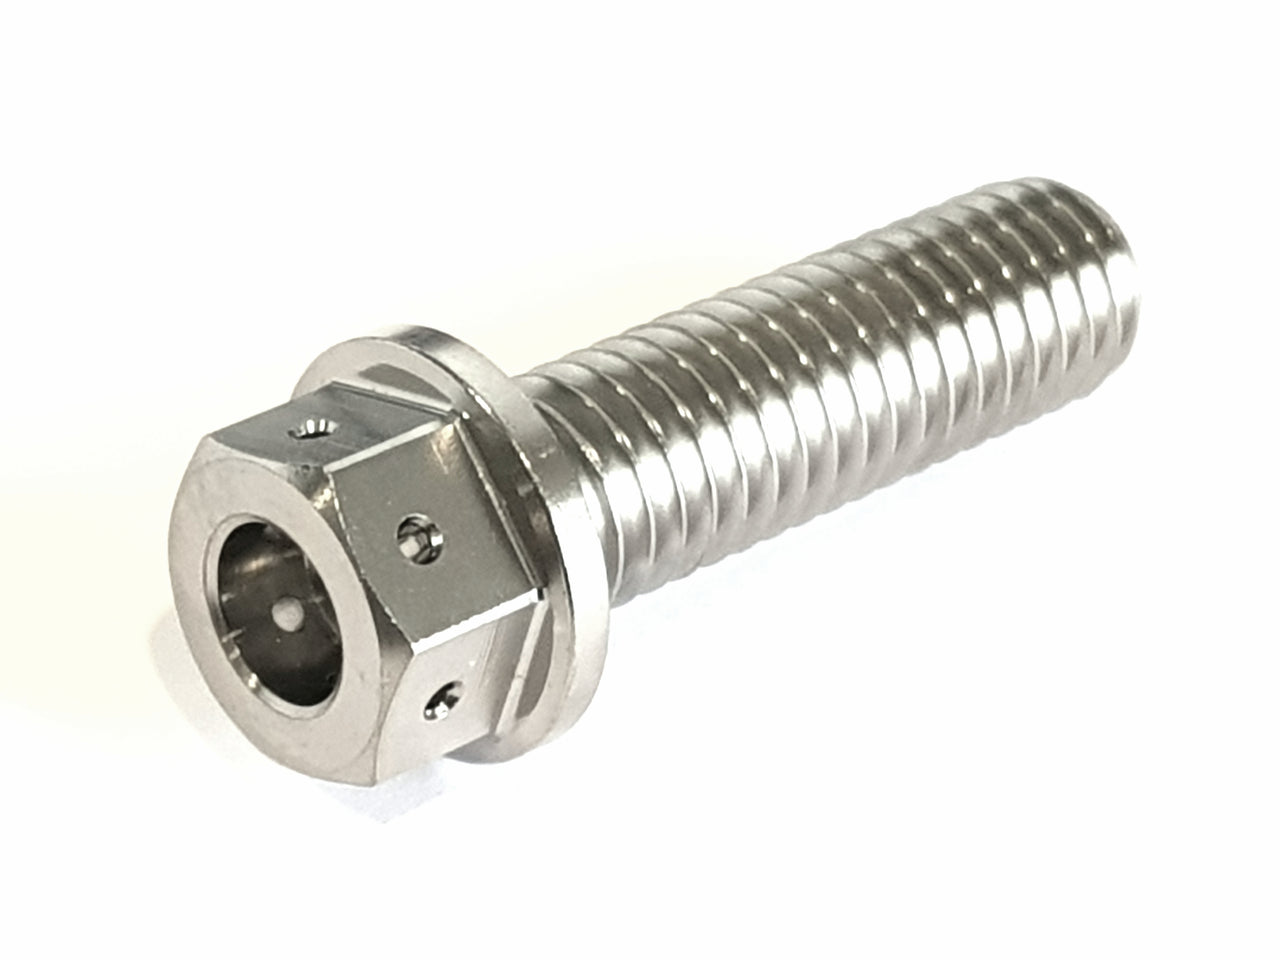 7/16 UNC 1.500" long reduced hex bolt with holes drilled